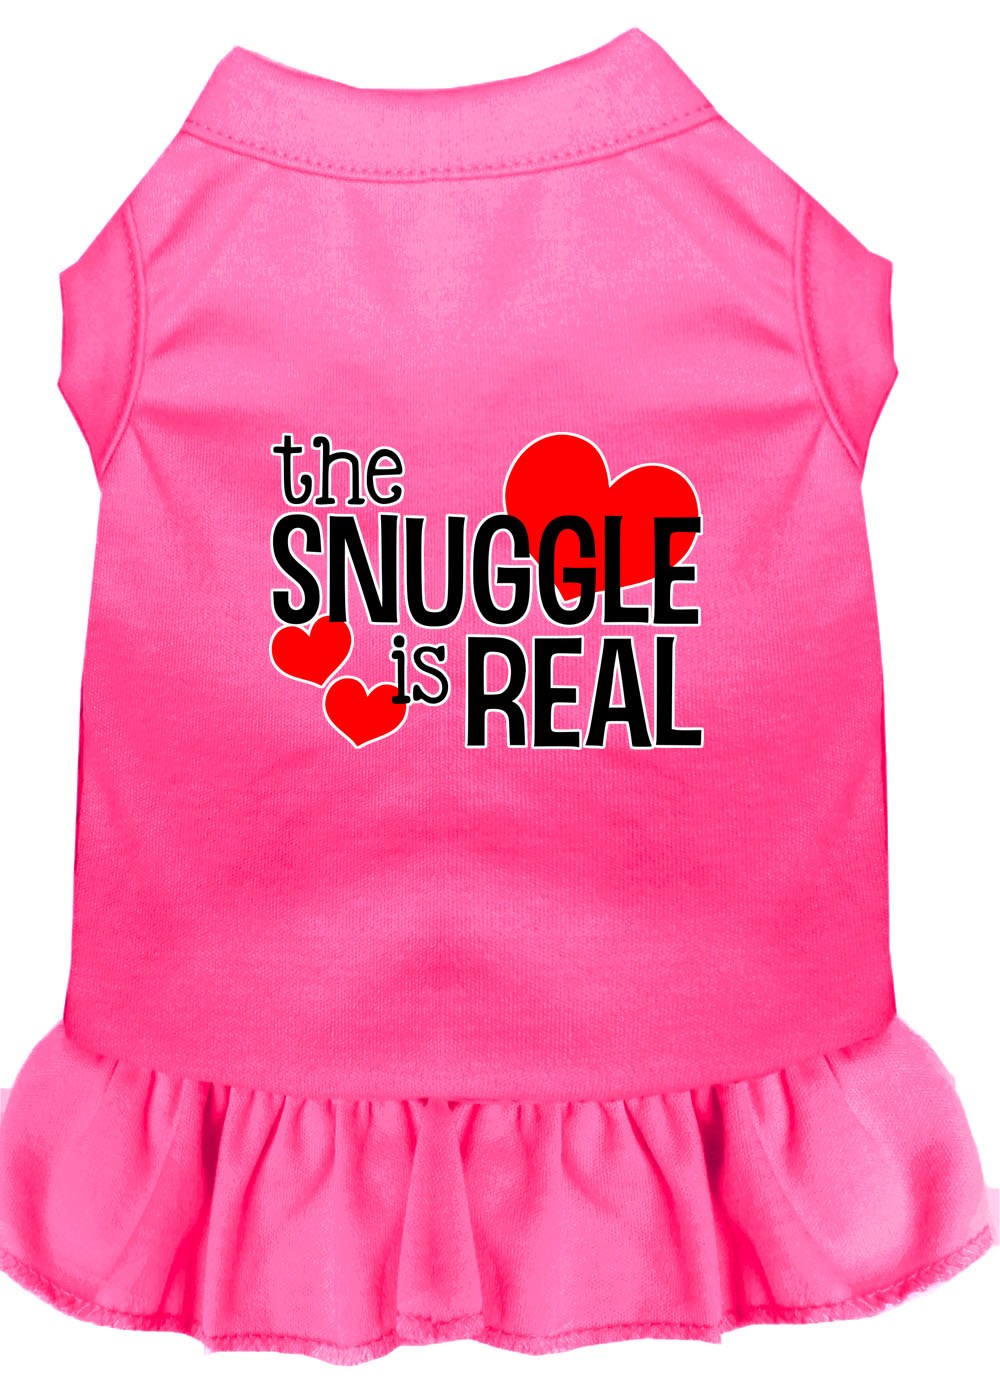 The Snuggle is Real Screen Print Dog Dress Bright Pink Sm